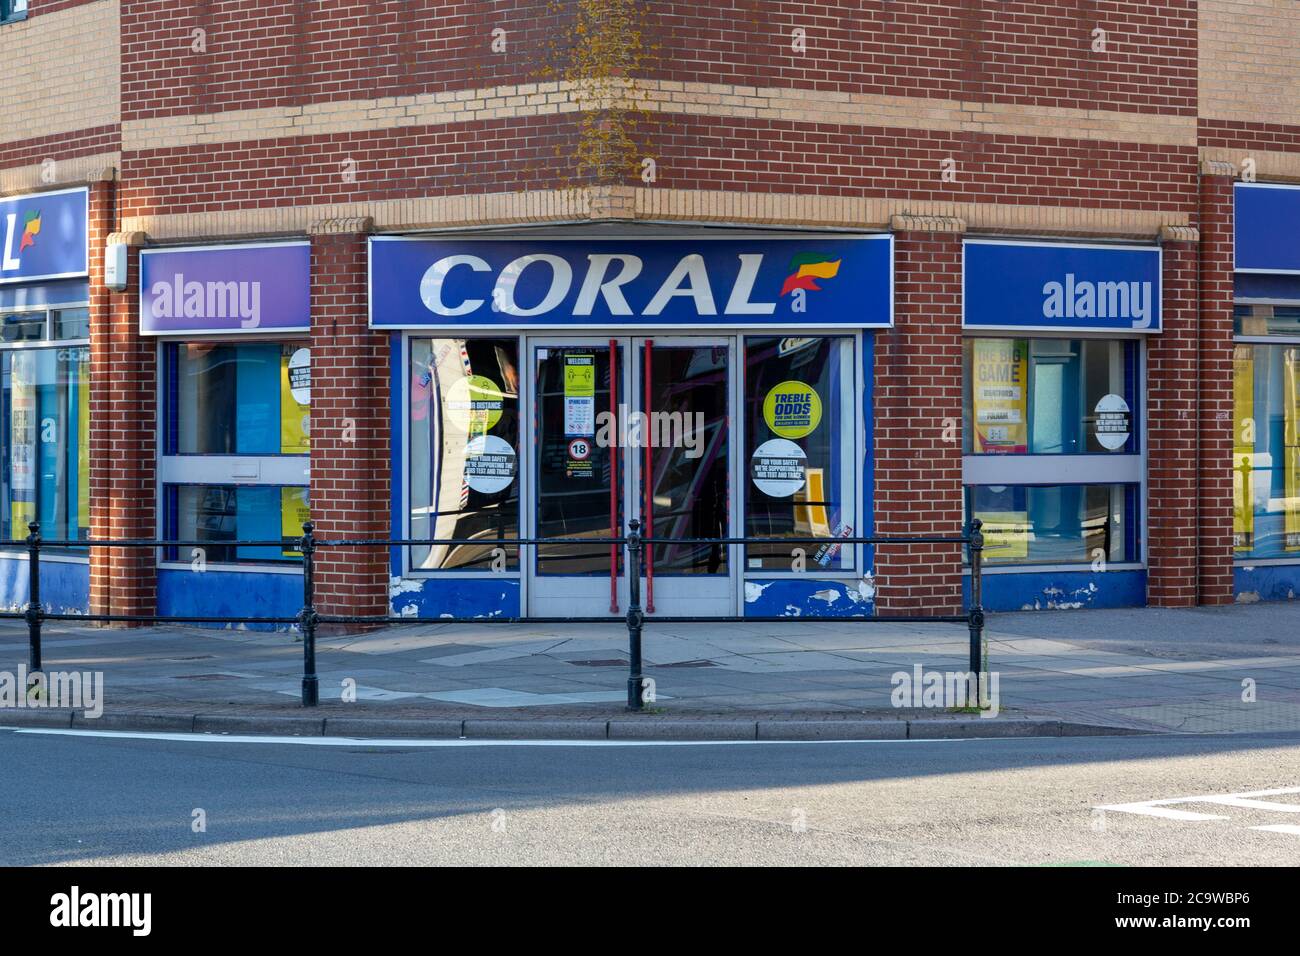 The exterior or facade of a Coral bookmakers shop or bookies on an English high street Stock Photo